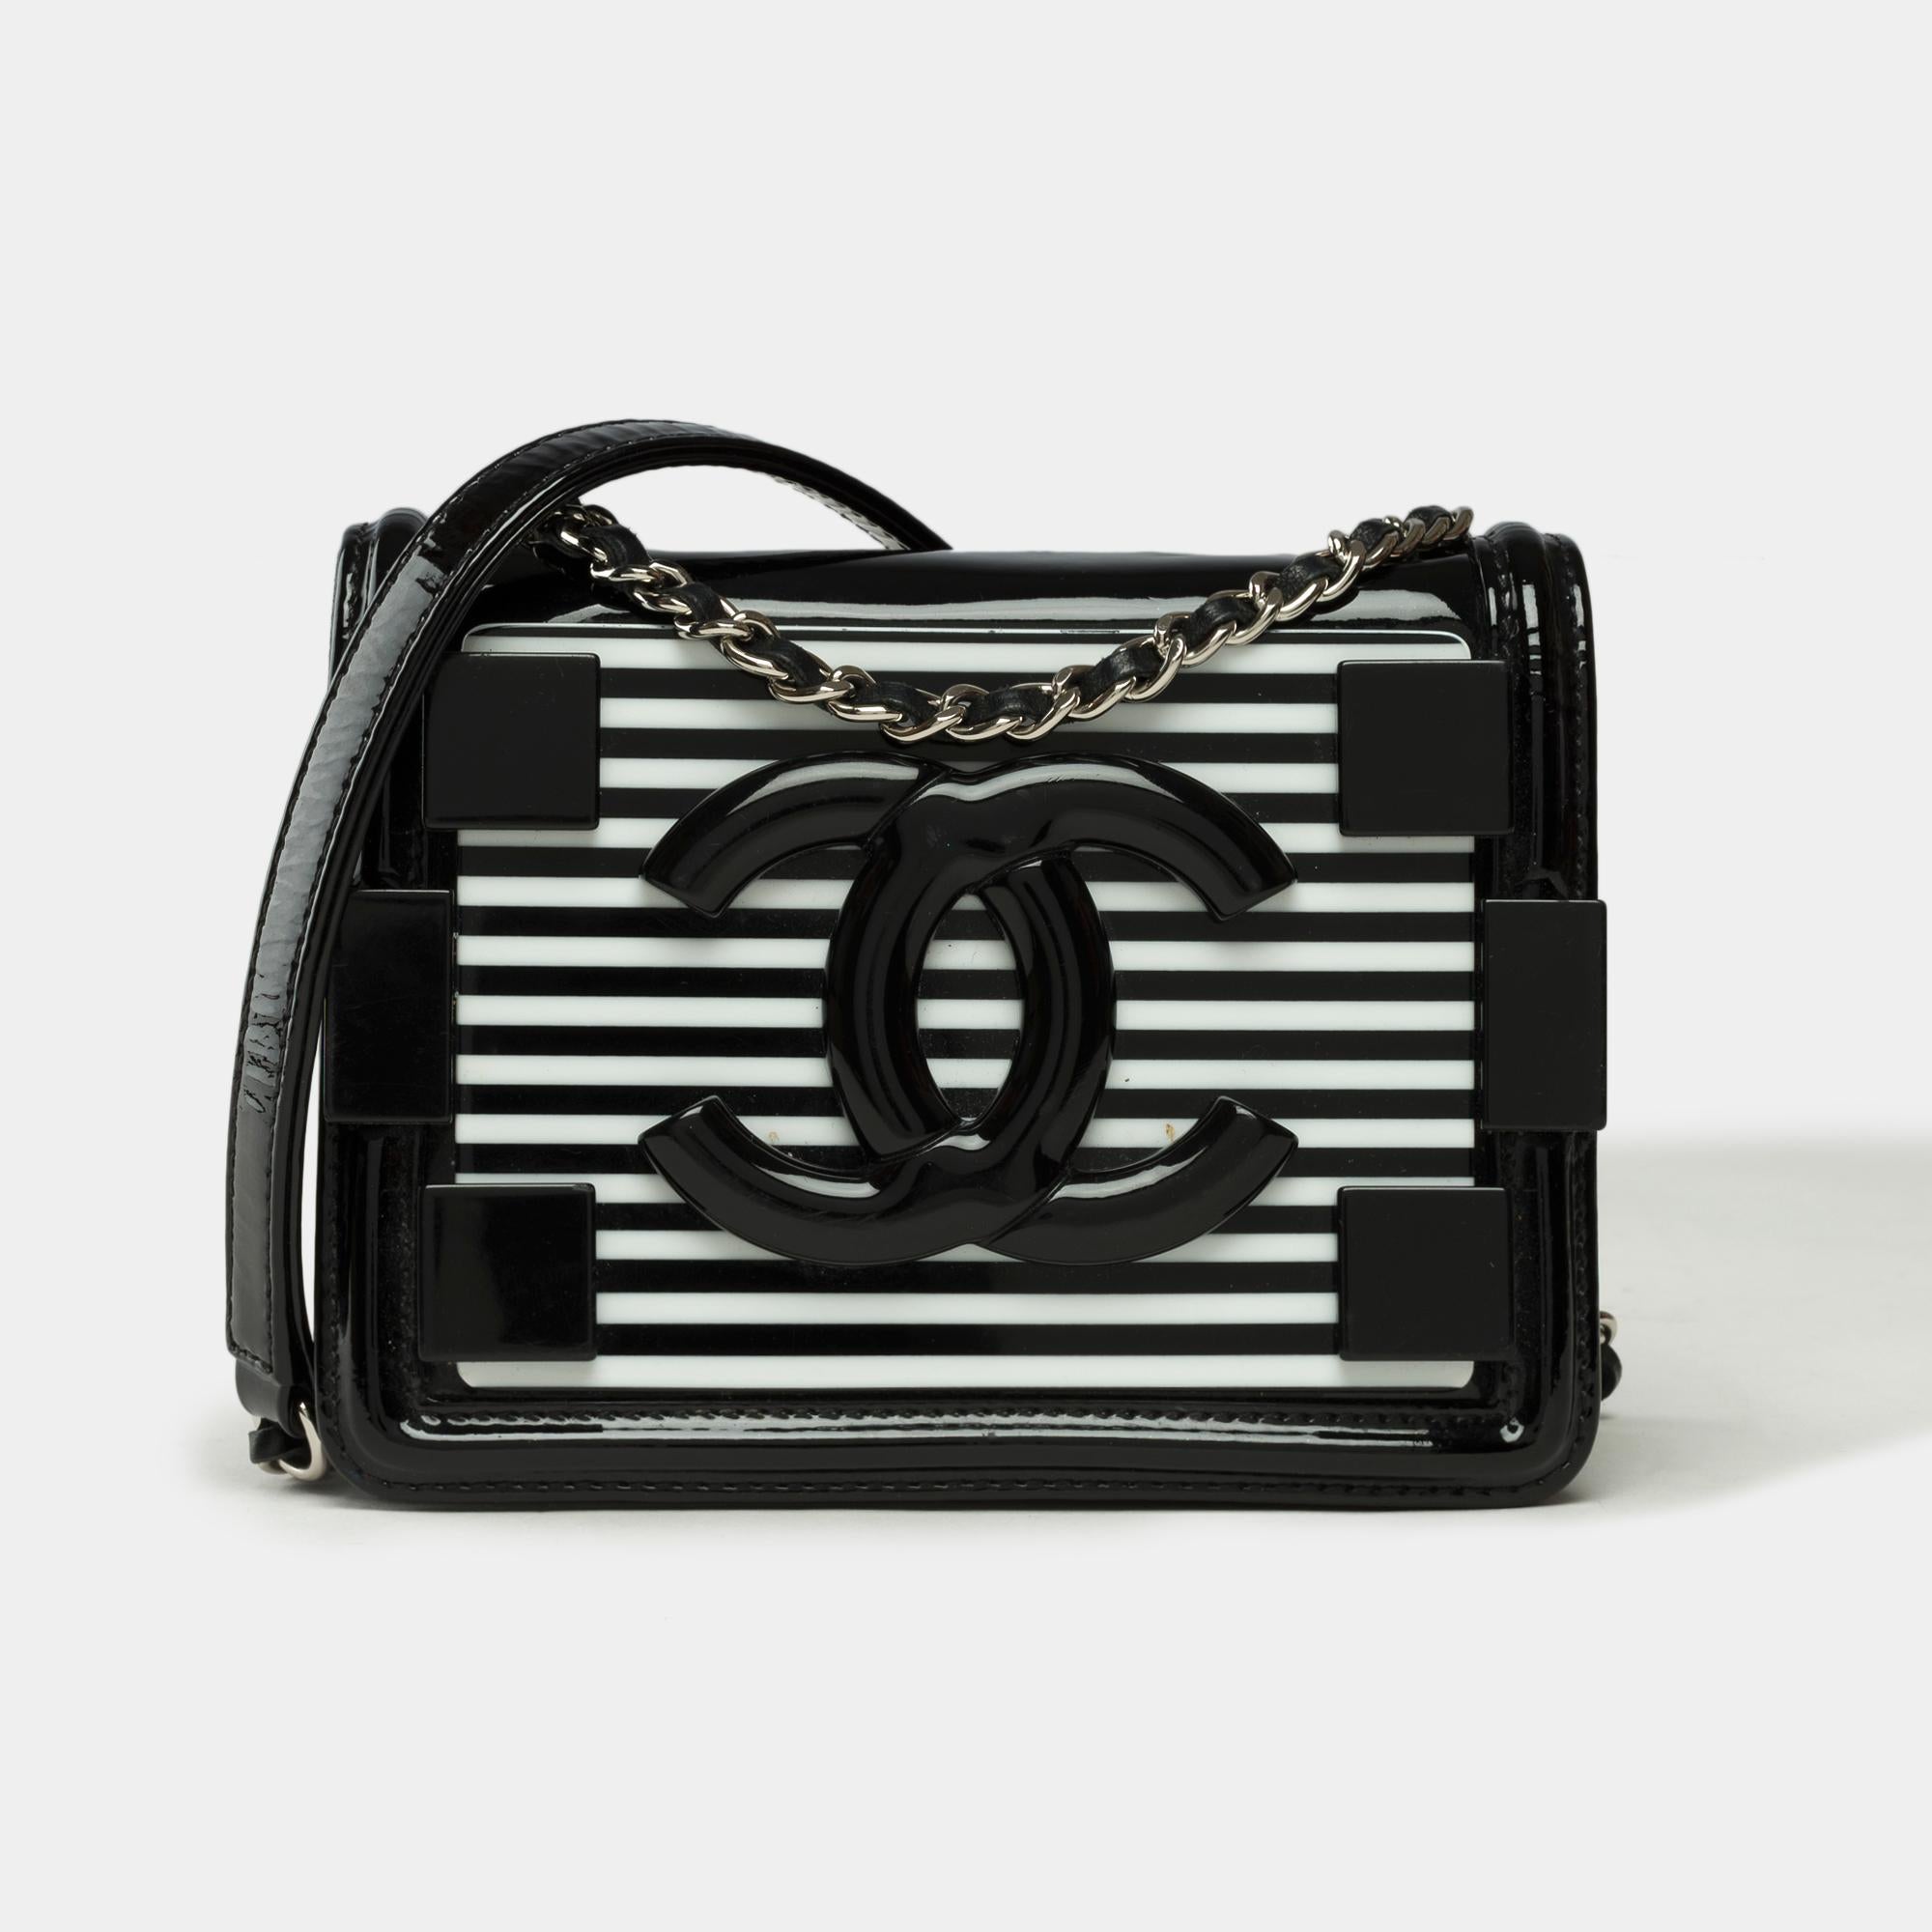 Stunning​ ​&​ ​Rare​ ​Chanel​ ​limited​ ​edition​ ​Lego​ ​mini​ ​brick​ ​shoulder​ ​bag​ ​in​ ​black​ ​quilted​ ​patent​ ​leather​ ​with​ ​black/white​ ​plexiglas​ ​plates​ ​on​ ​the​ ​front,​ ​silver​ ​metal​ ​shoulder​ ​strap​ ​interlaced​ ​with​